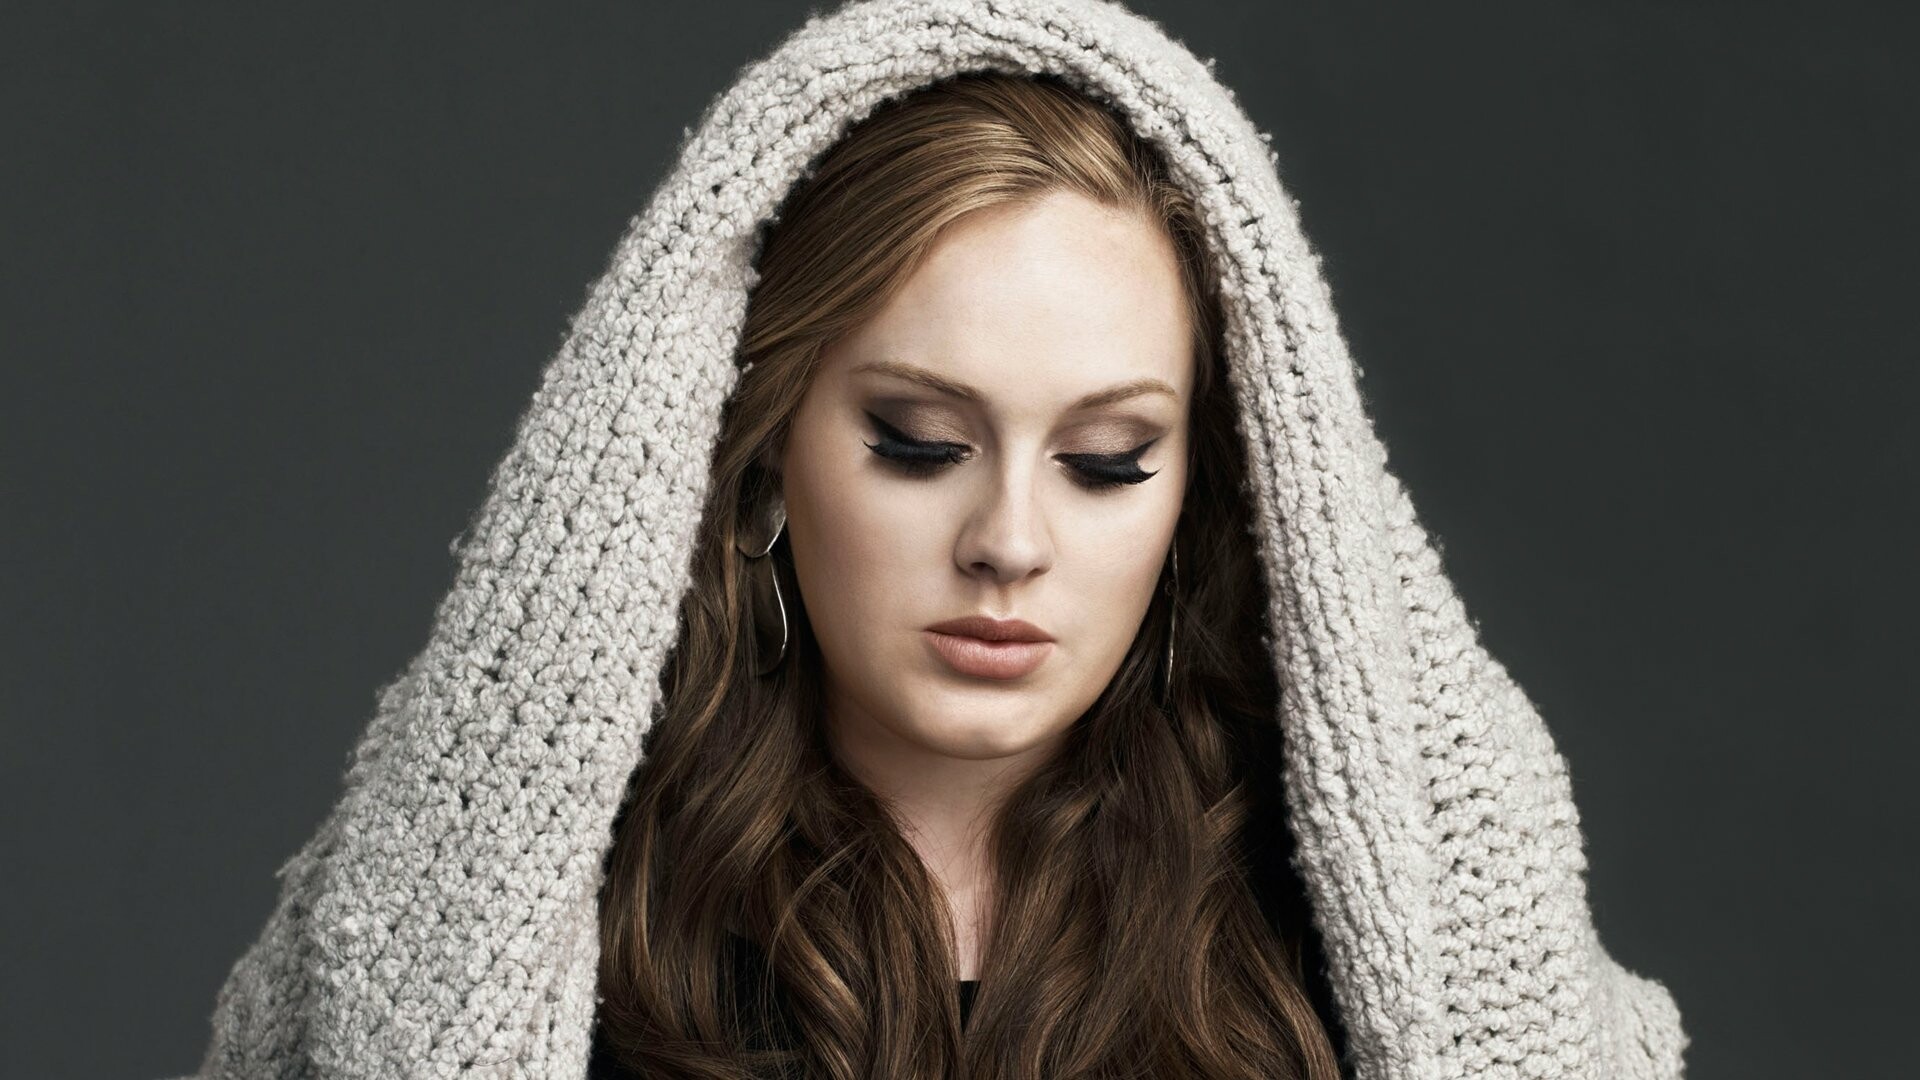 Adele: An English singer-songwriter, Known for her impressive ballads and mesmerizing voice. 1920x1080 Full HD Background.